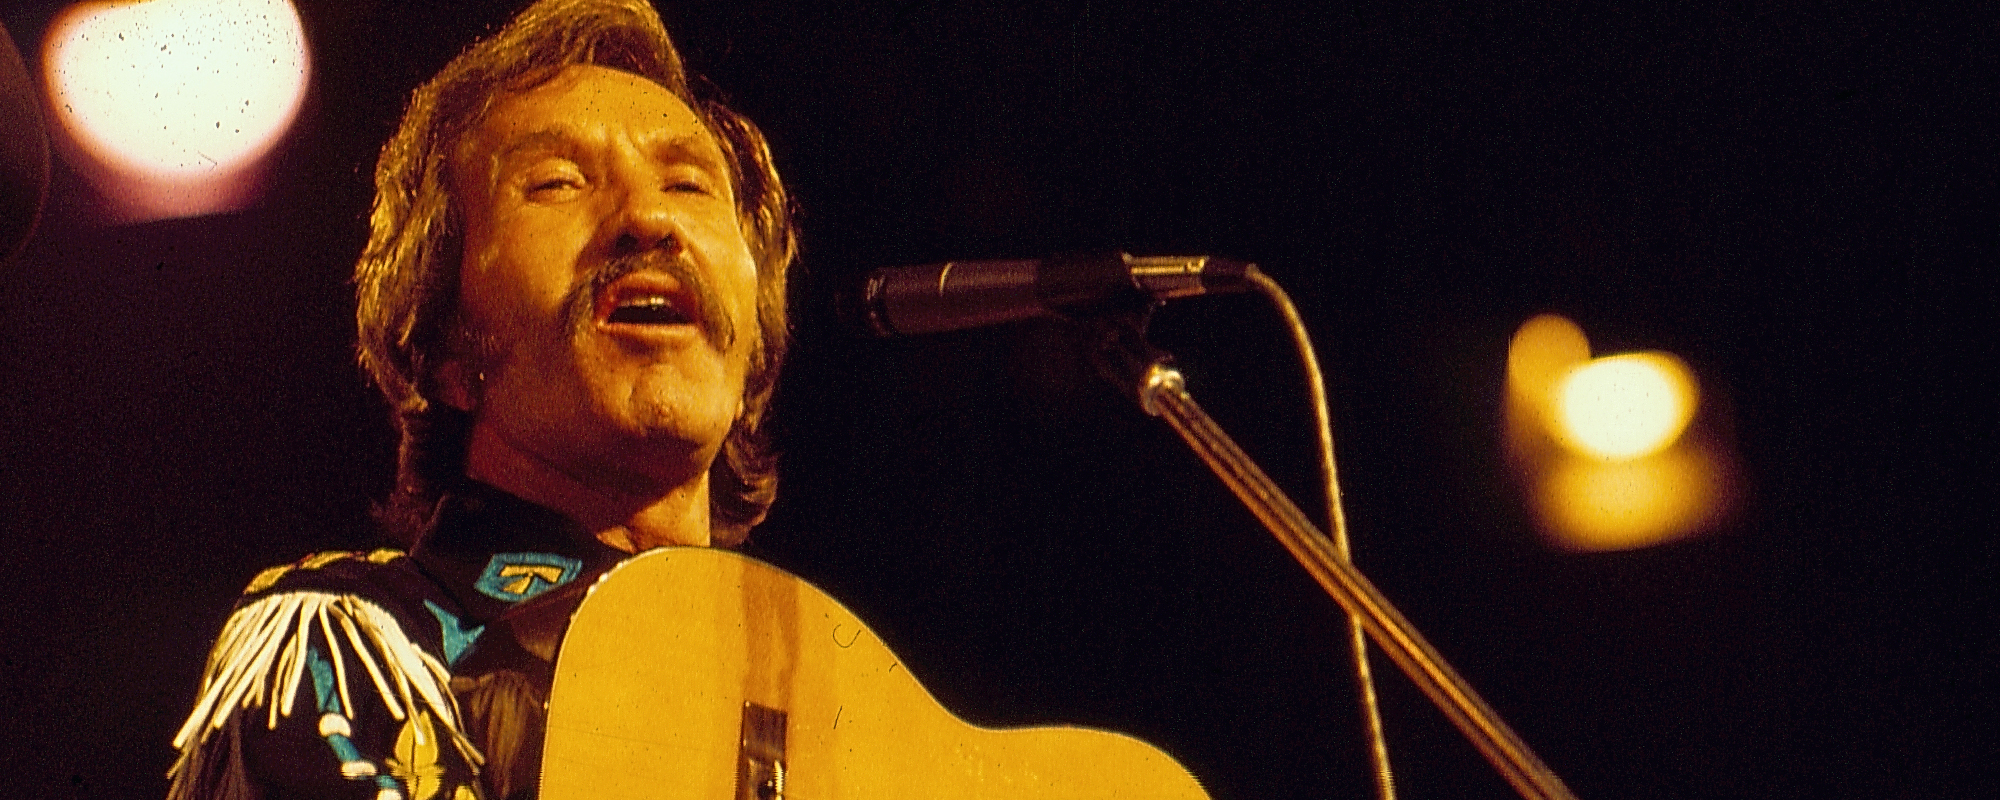 6 Classic Country Songs that Tell Powerful Stories